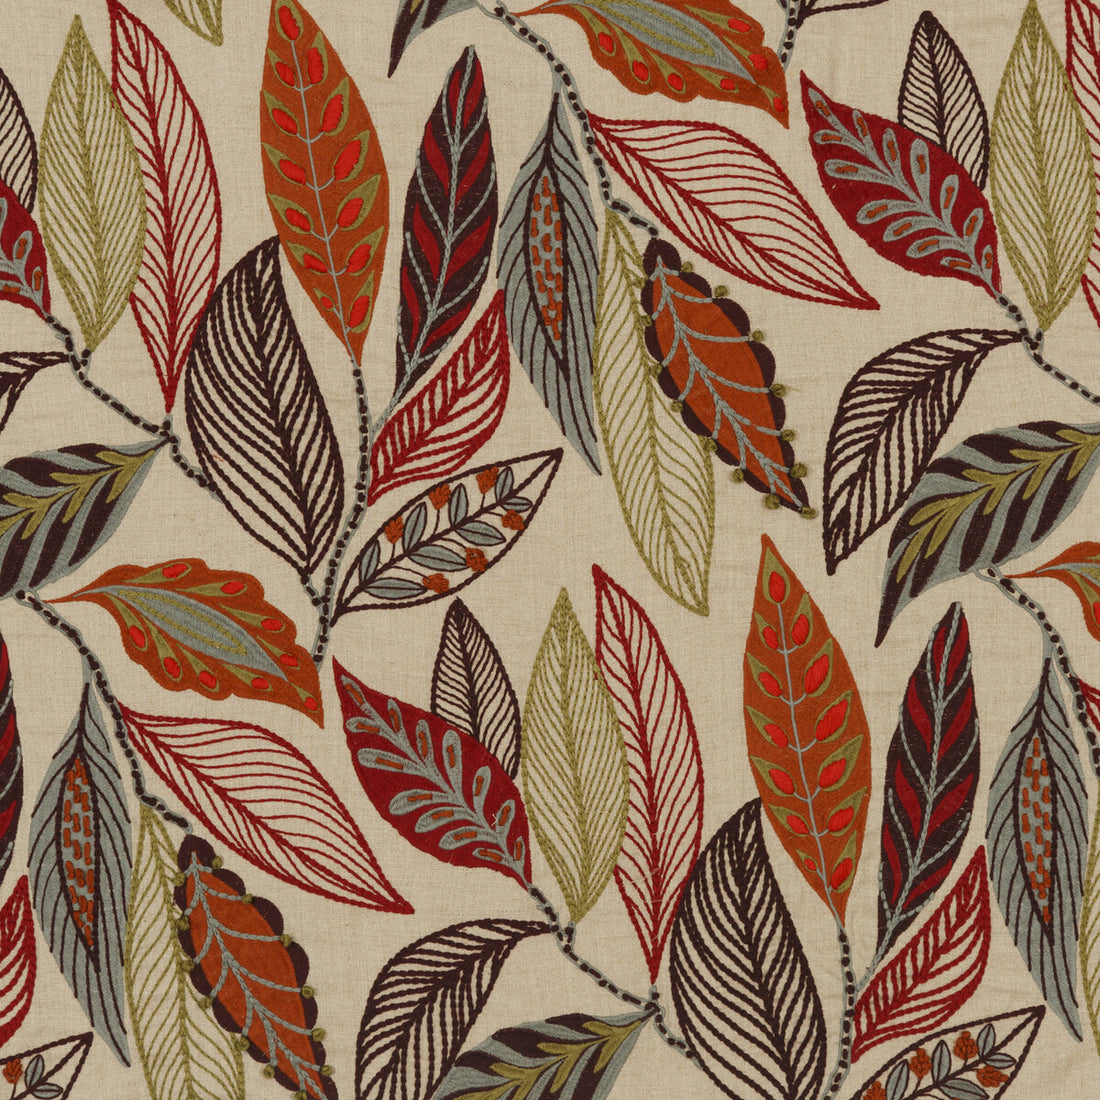 Forest Leaves fabric in red/plum color - pattern FD766.V54.0 - by Mulberry in the Festival collection